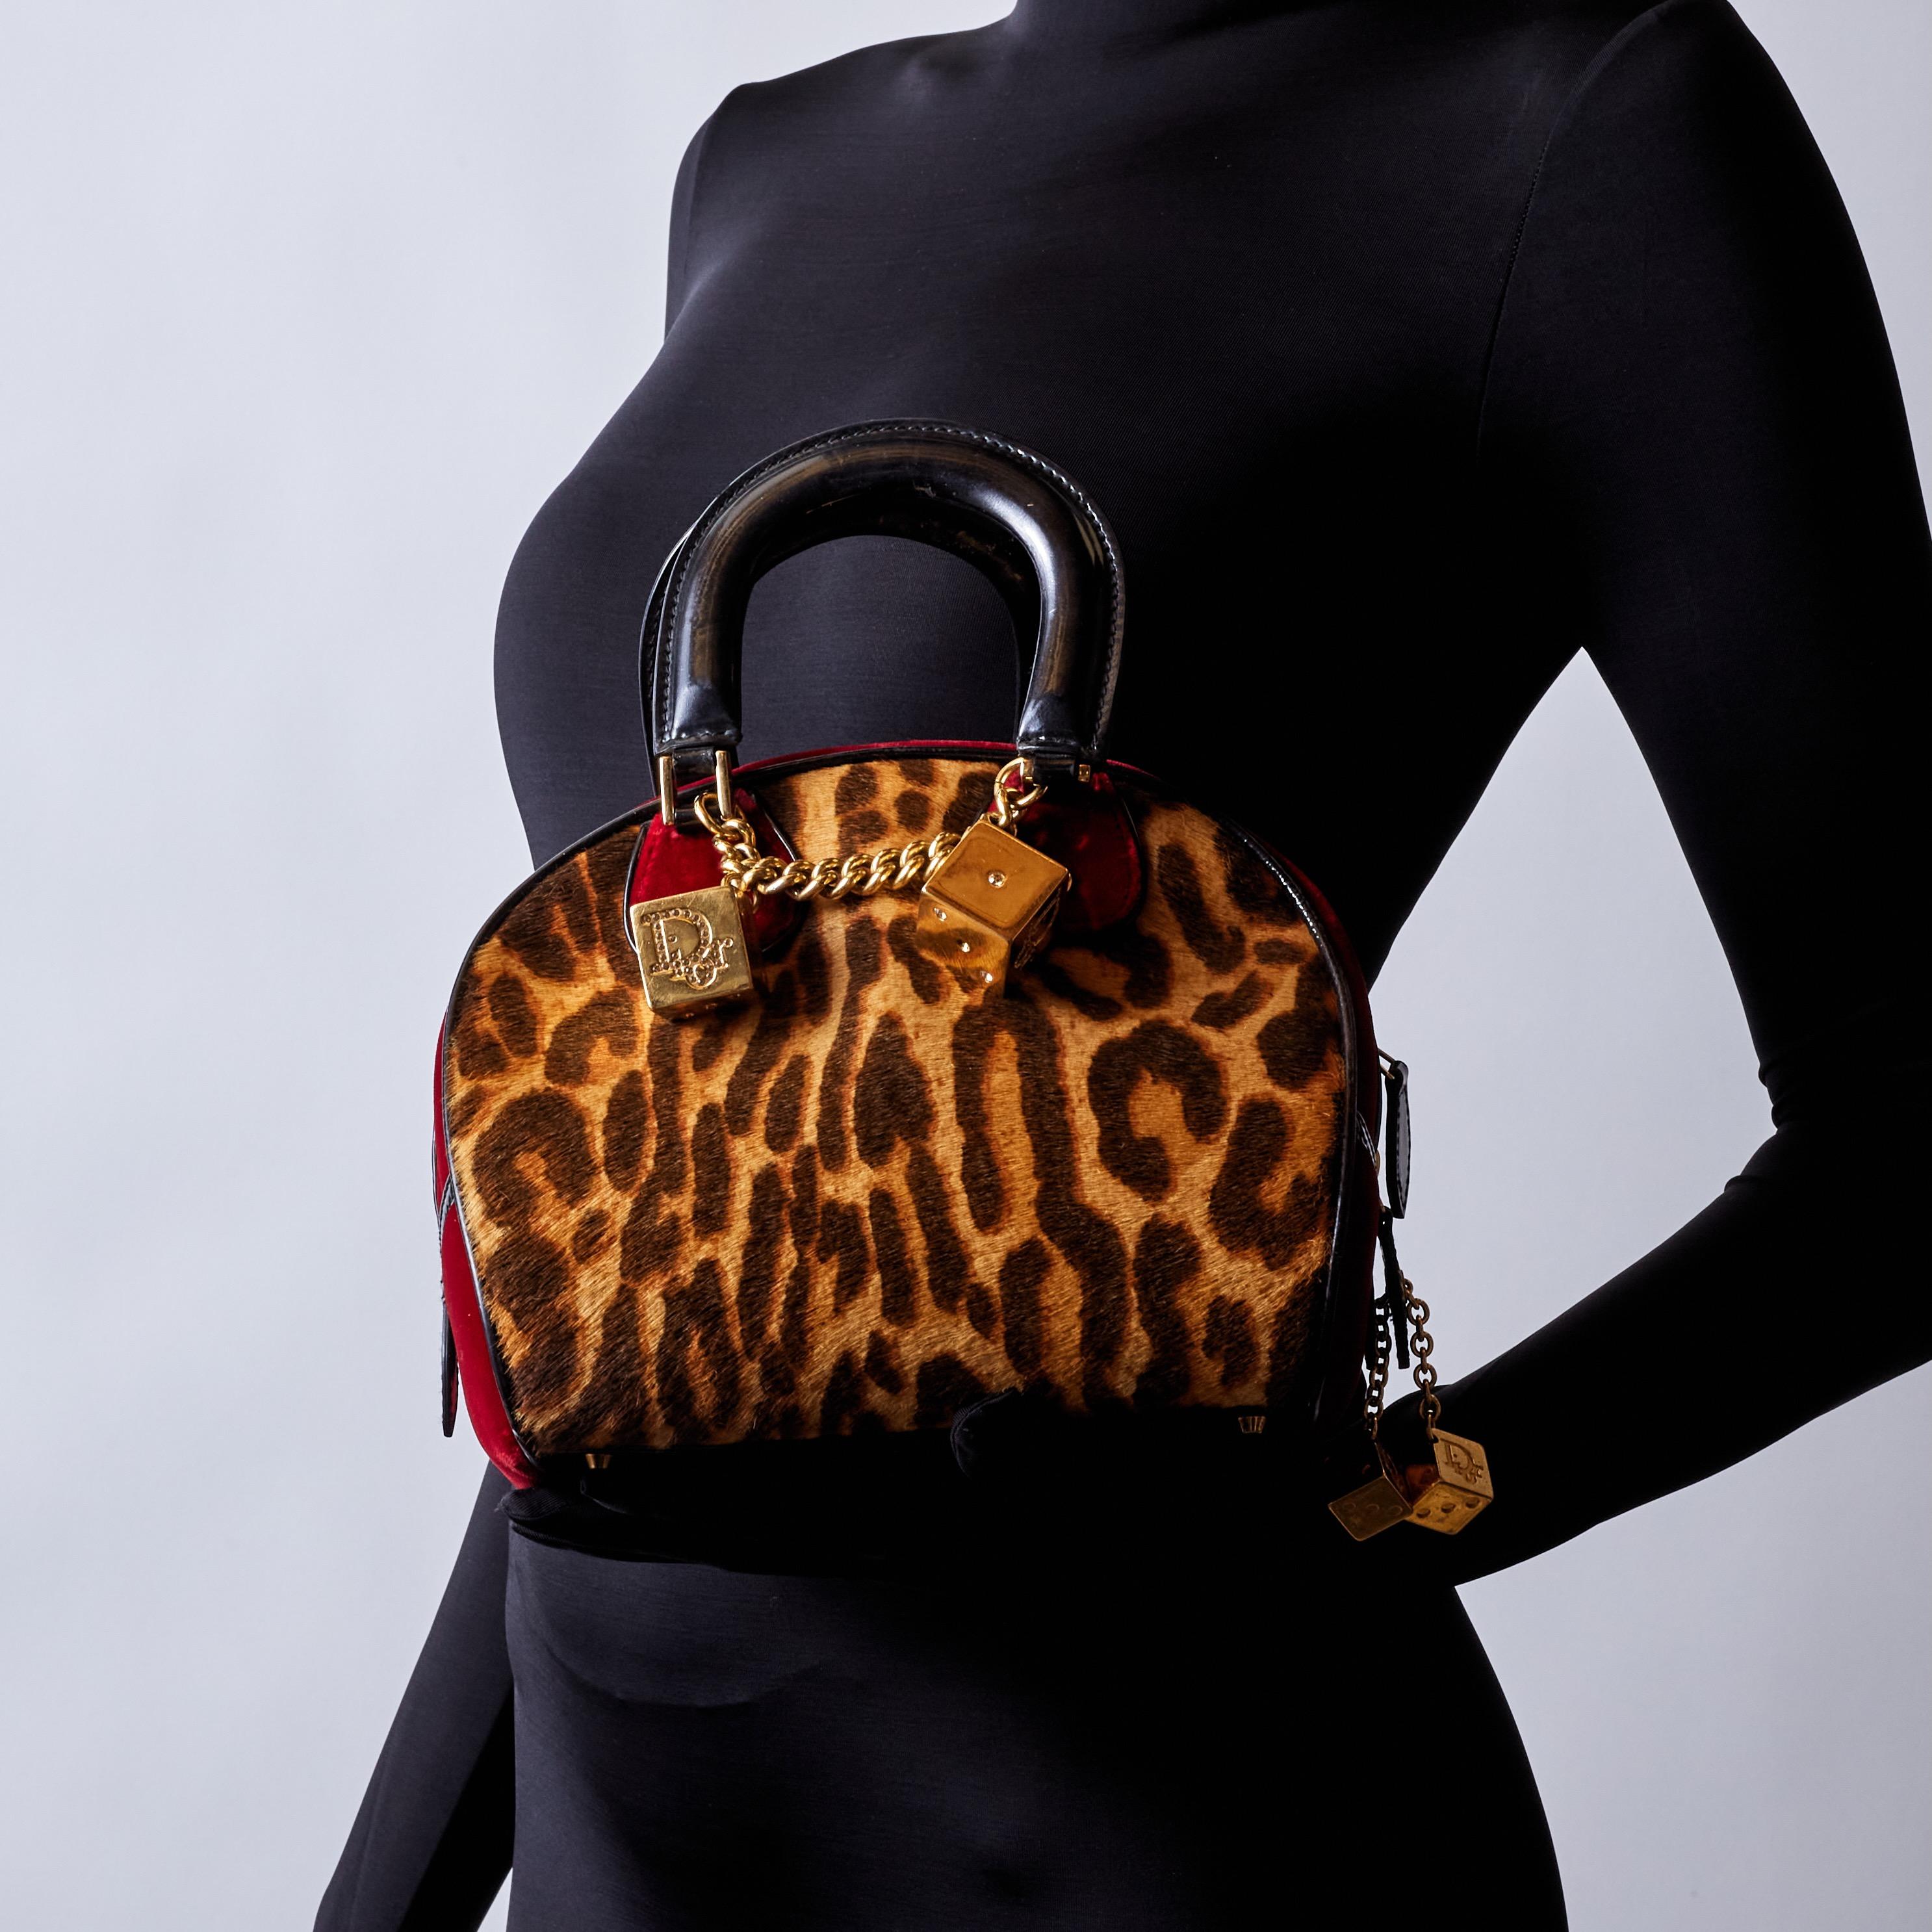 DIOR VINTAGE LEOPARD PRINT GAMBLER DICE BOWLER BAG MINI

This vintage bowler style bag is from the 2004 Collection by John Galliano. The bag features brown pony hair, leopard print, gold-tone hardware, leather & patent leather trim, chain-link